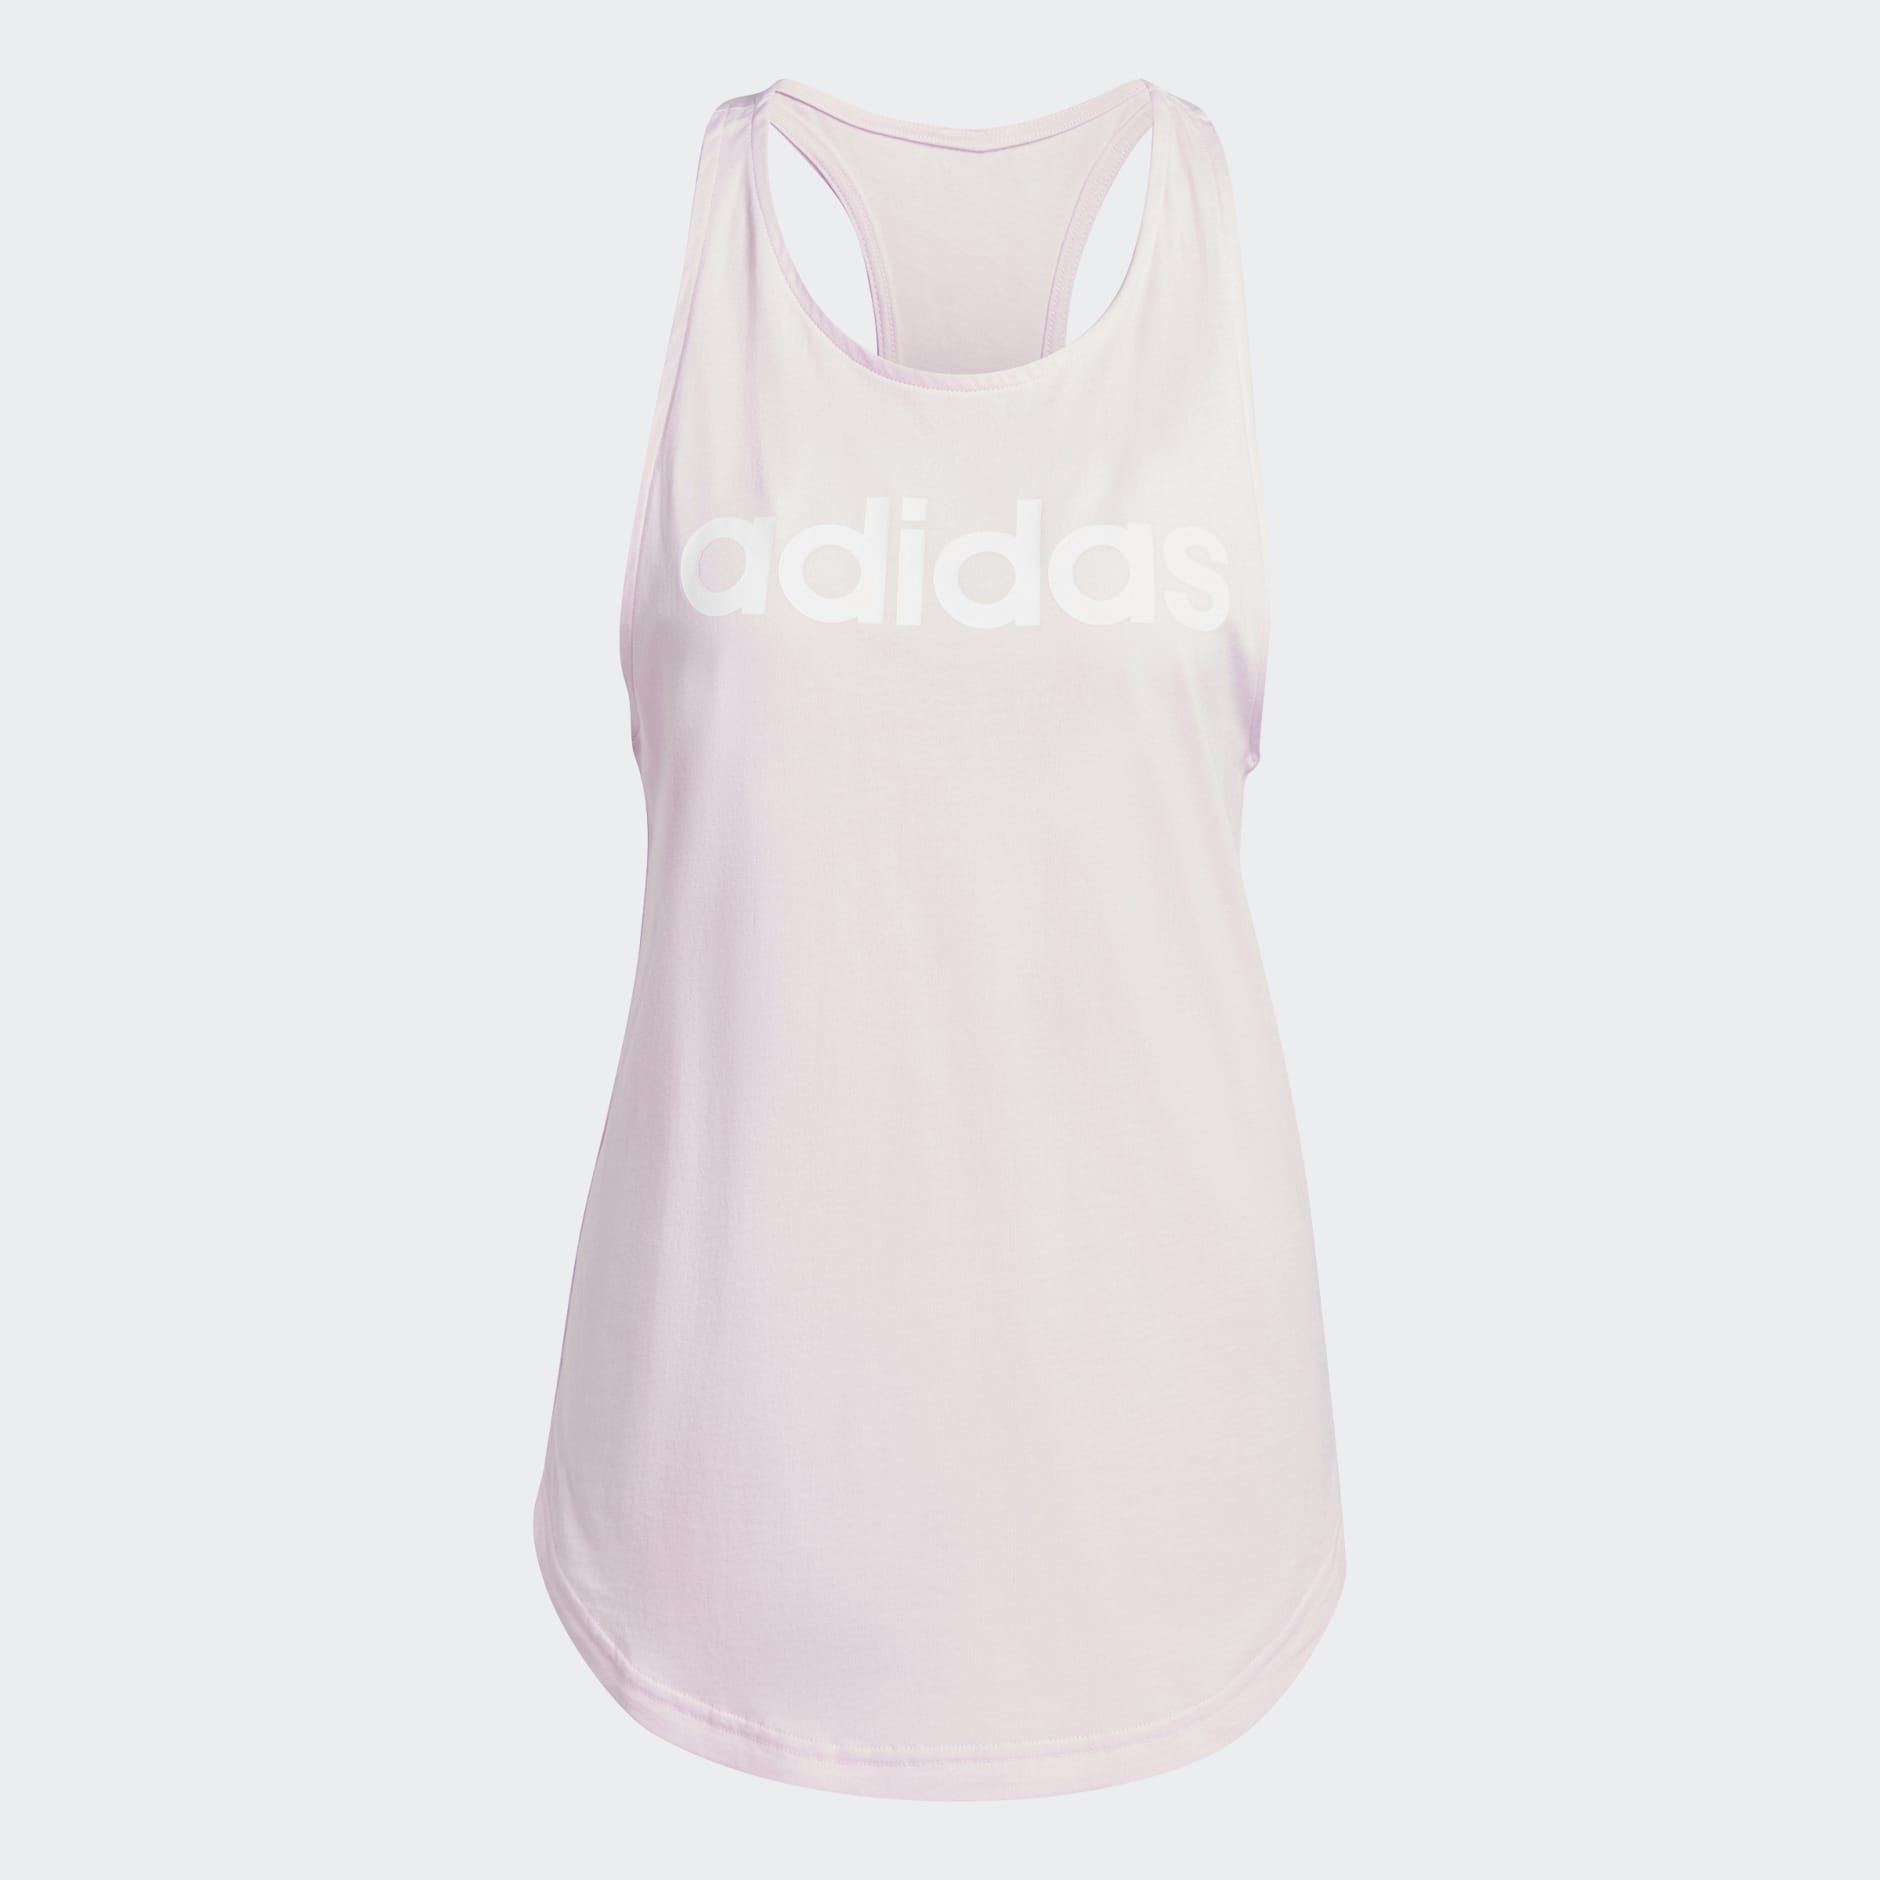 ADIDAS ADIDAS ICONS WINNERS TANK Online TOP 3.0 - SPORTSWEAR FUTURE Store Retail - IC0510 bCODE – Your Fashion